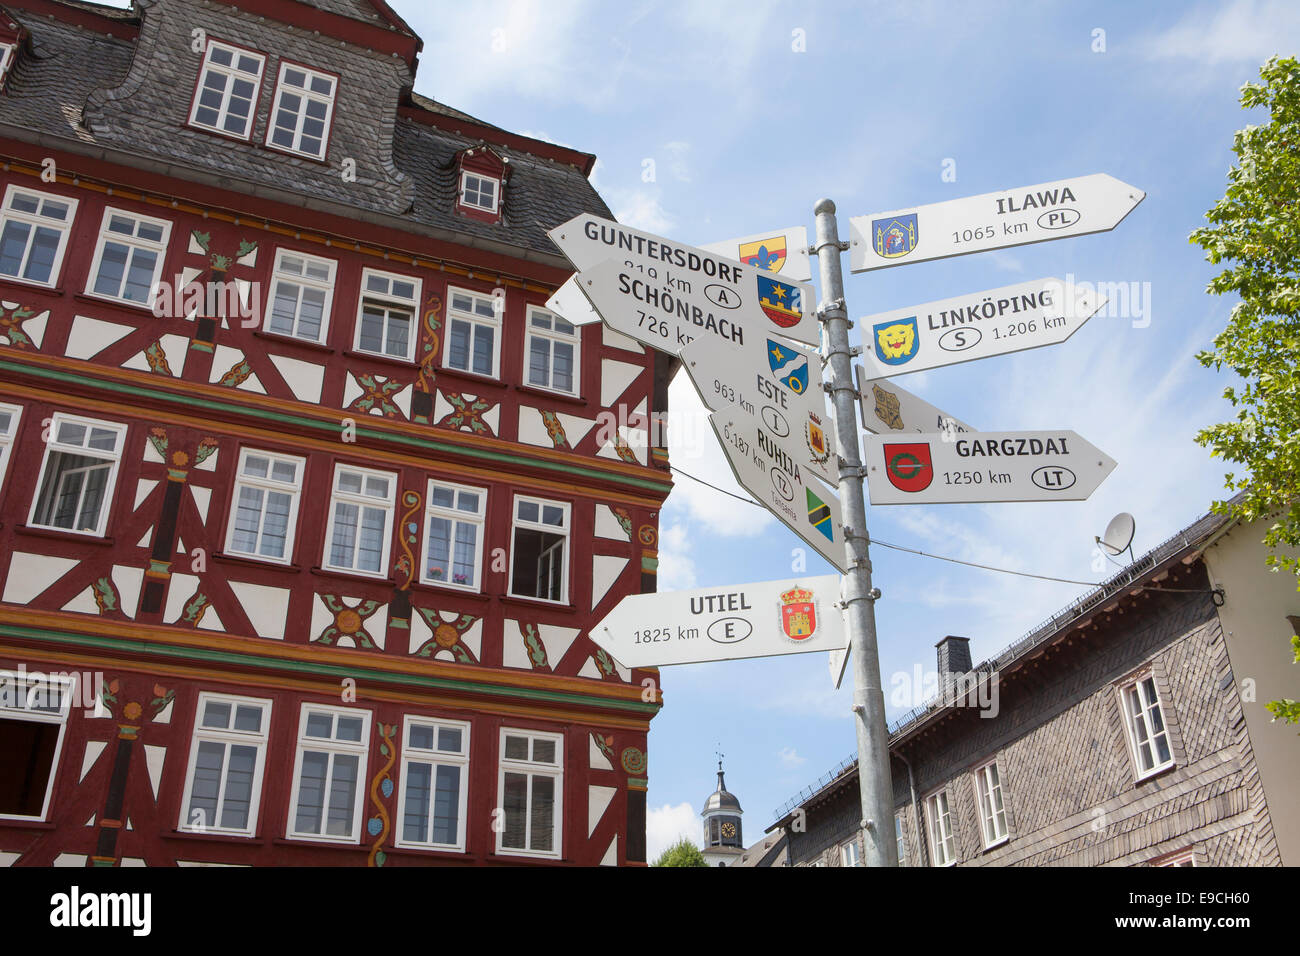 City hall, Buttermarkt butter market, Signpost, partner cities, historic old town of Herborn, Hesse, Germany, Europe Stock Photo